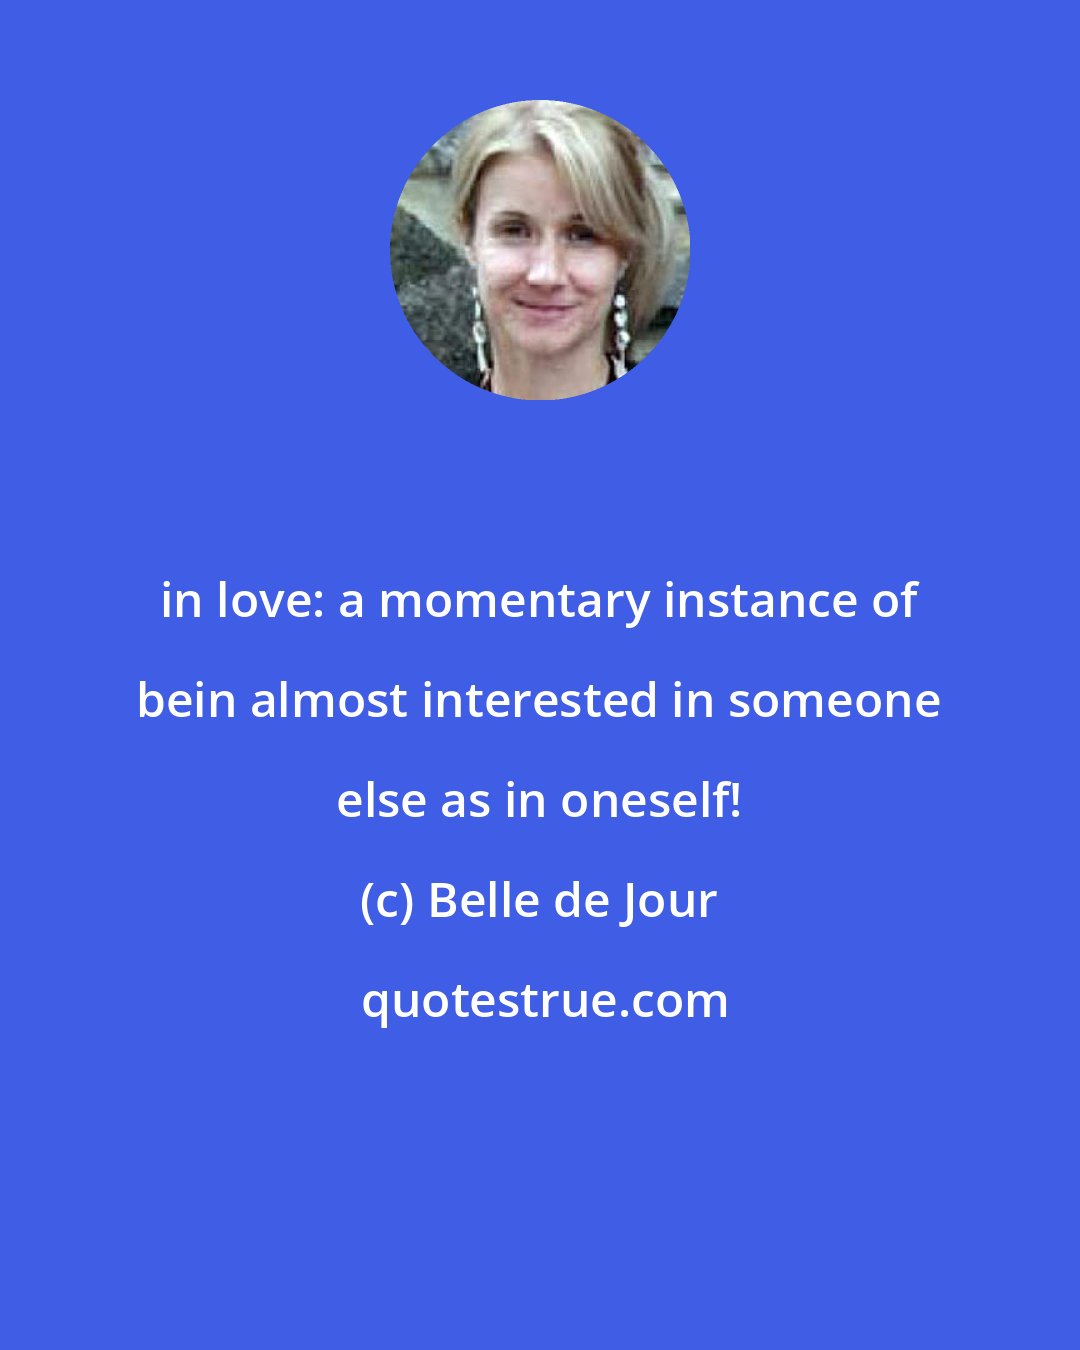 Belle de Jour: in love: a momentary instance of bein almost interested in someone else as in oneself!